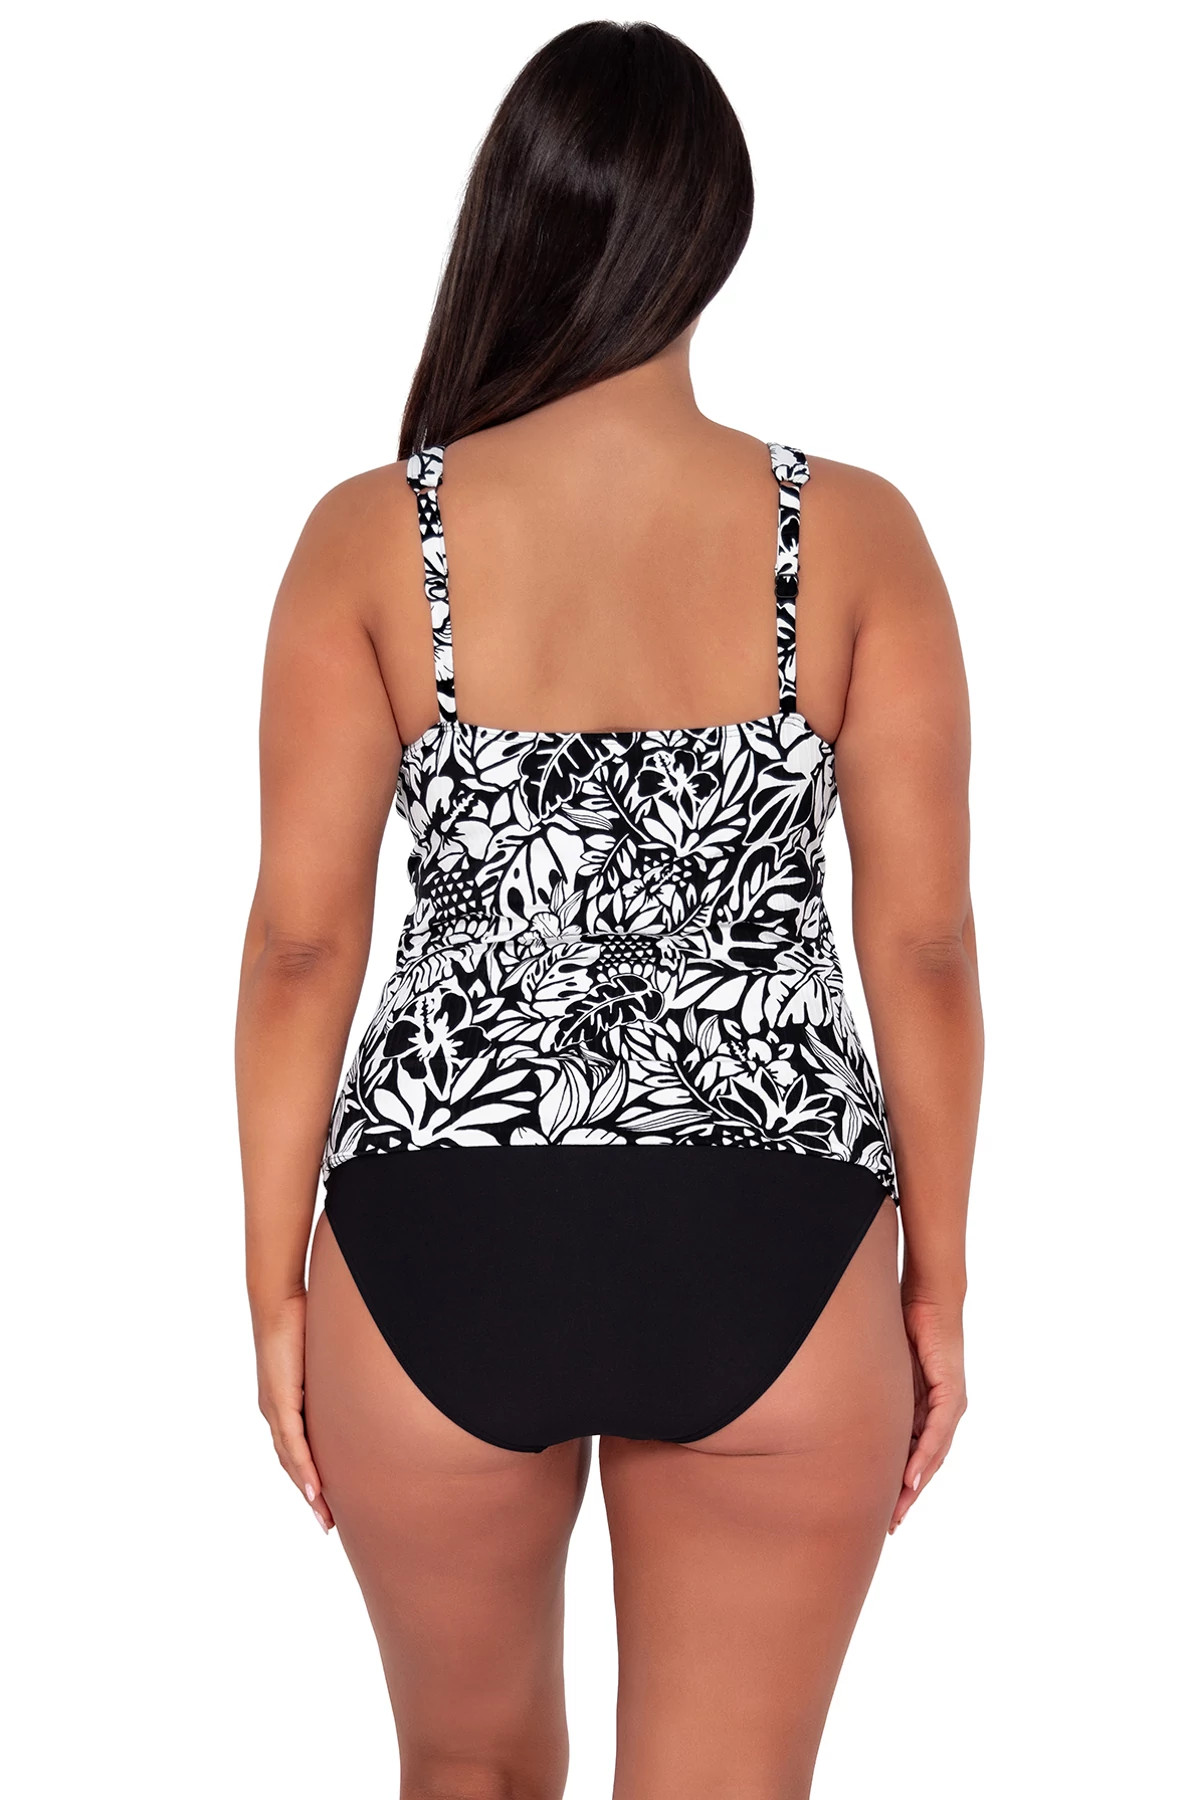 CARIBBEAN SEAGRASS TEXTURE Emerson Tankini Top image number 3